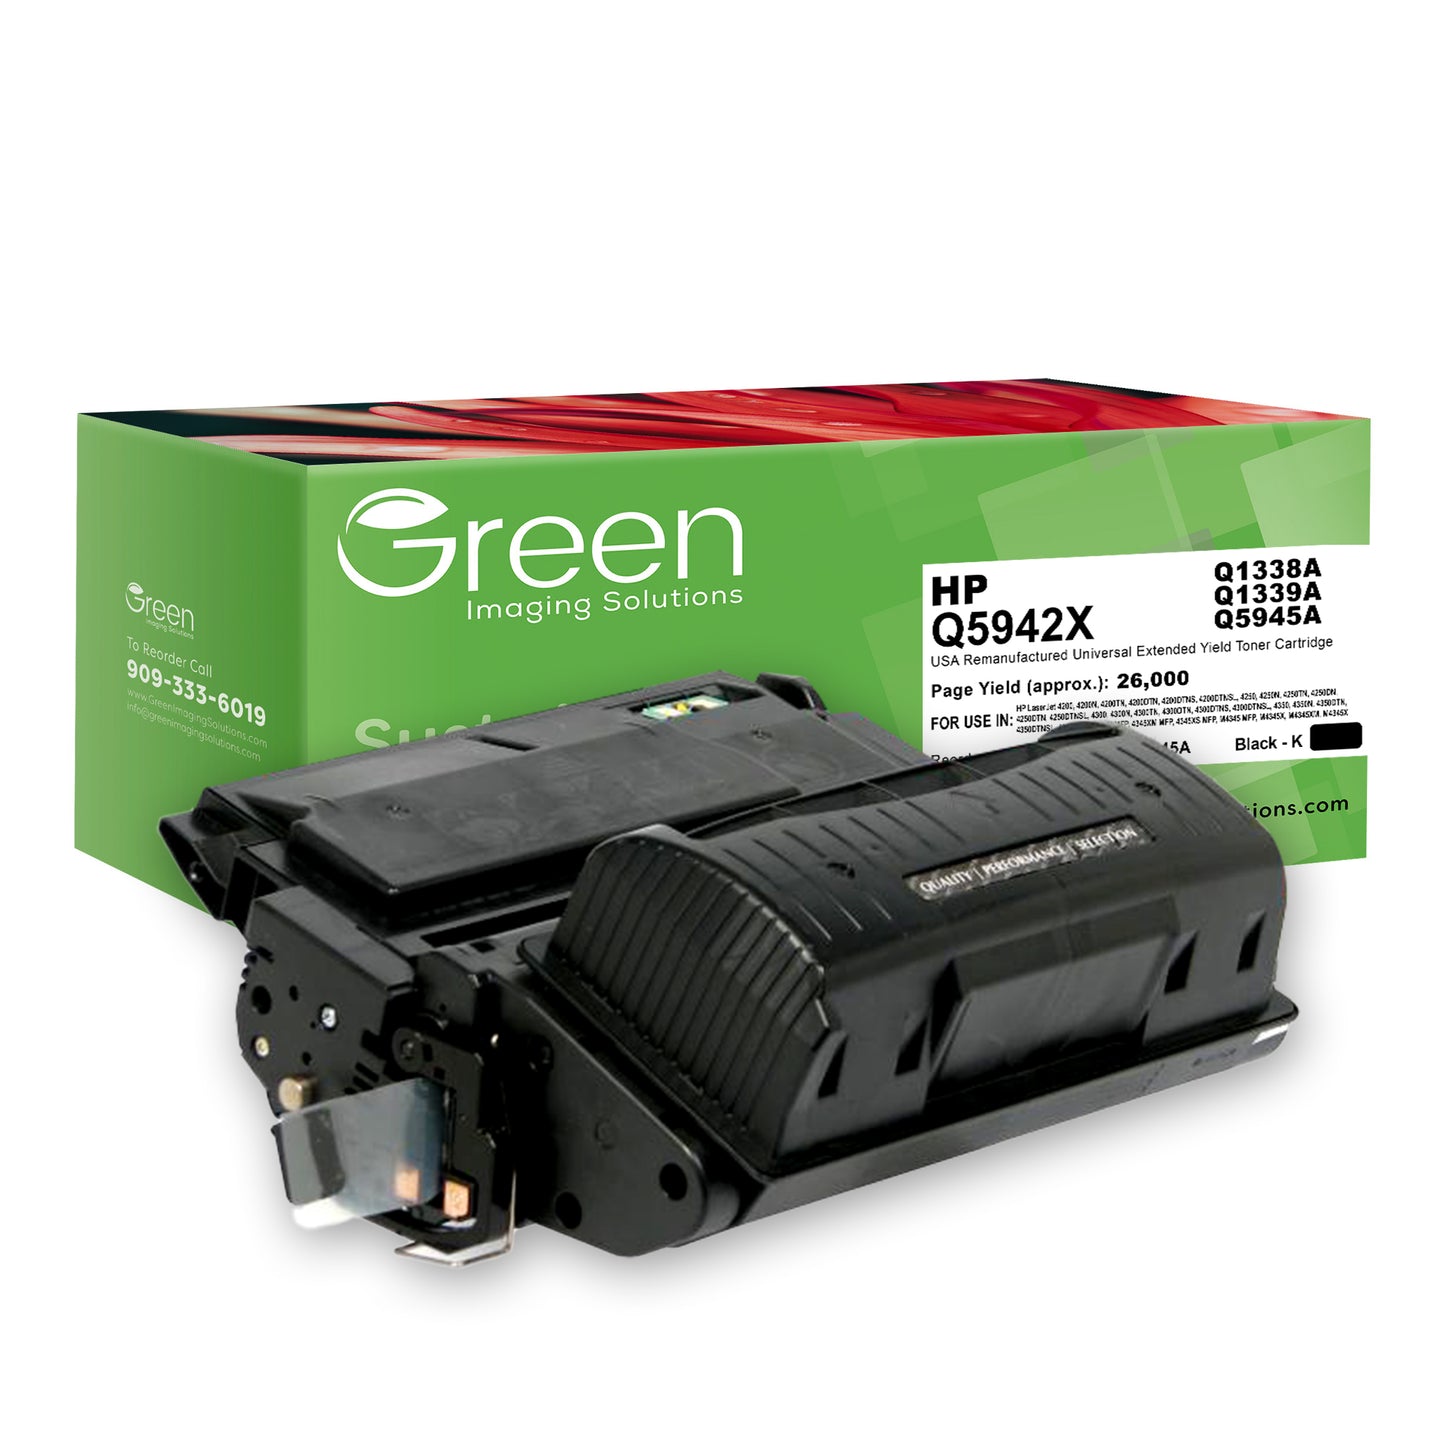 GIS USA Remanufactured Universal Extended Yield Toner Cartridge for HP Q1338A/Q1339A/Q5945A/Q5942X (HP 38A/39A/45A/42X)